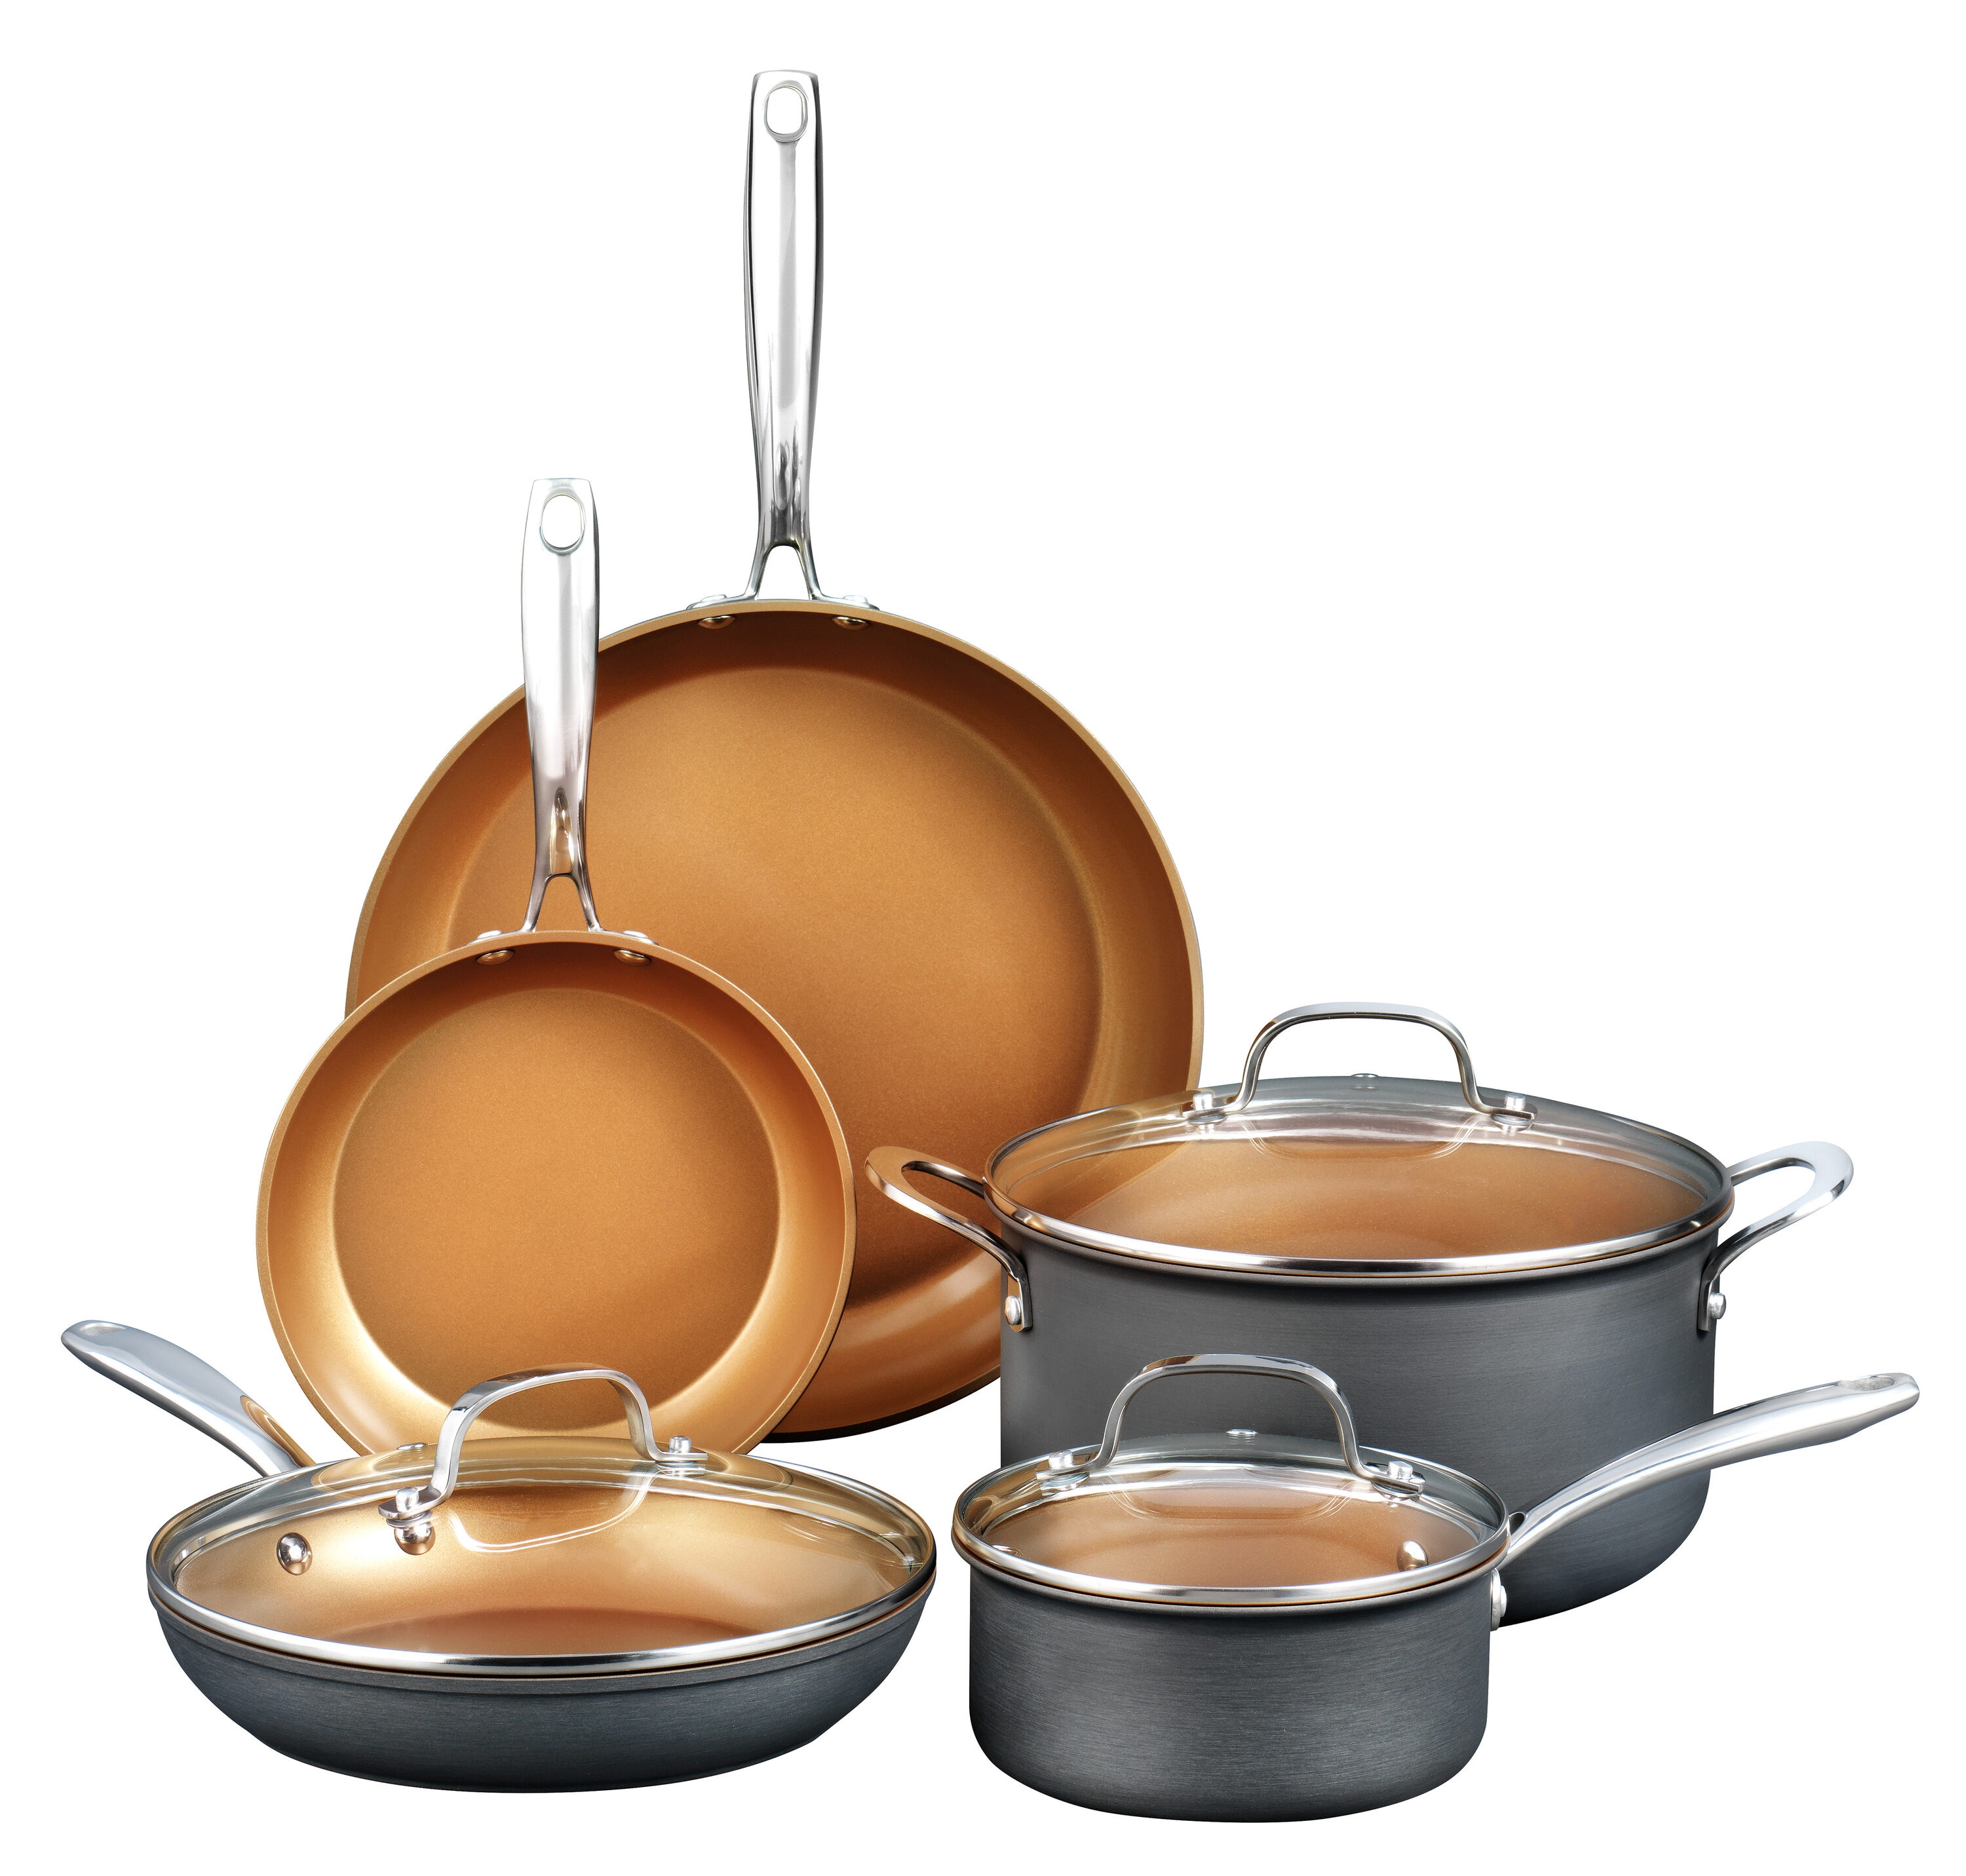 Gotham Steel Copper 8-Piece Stainless Steel Cookware Set with Non